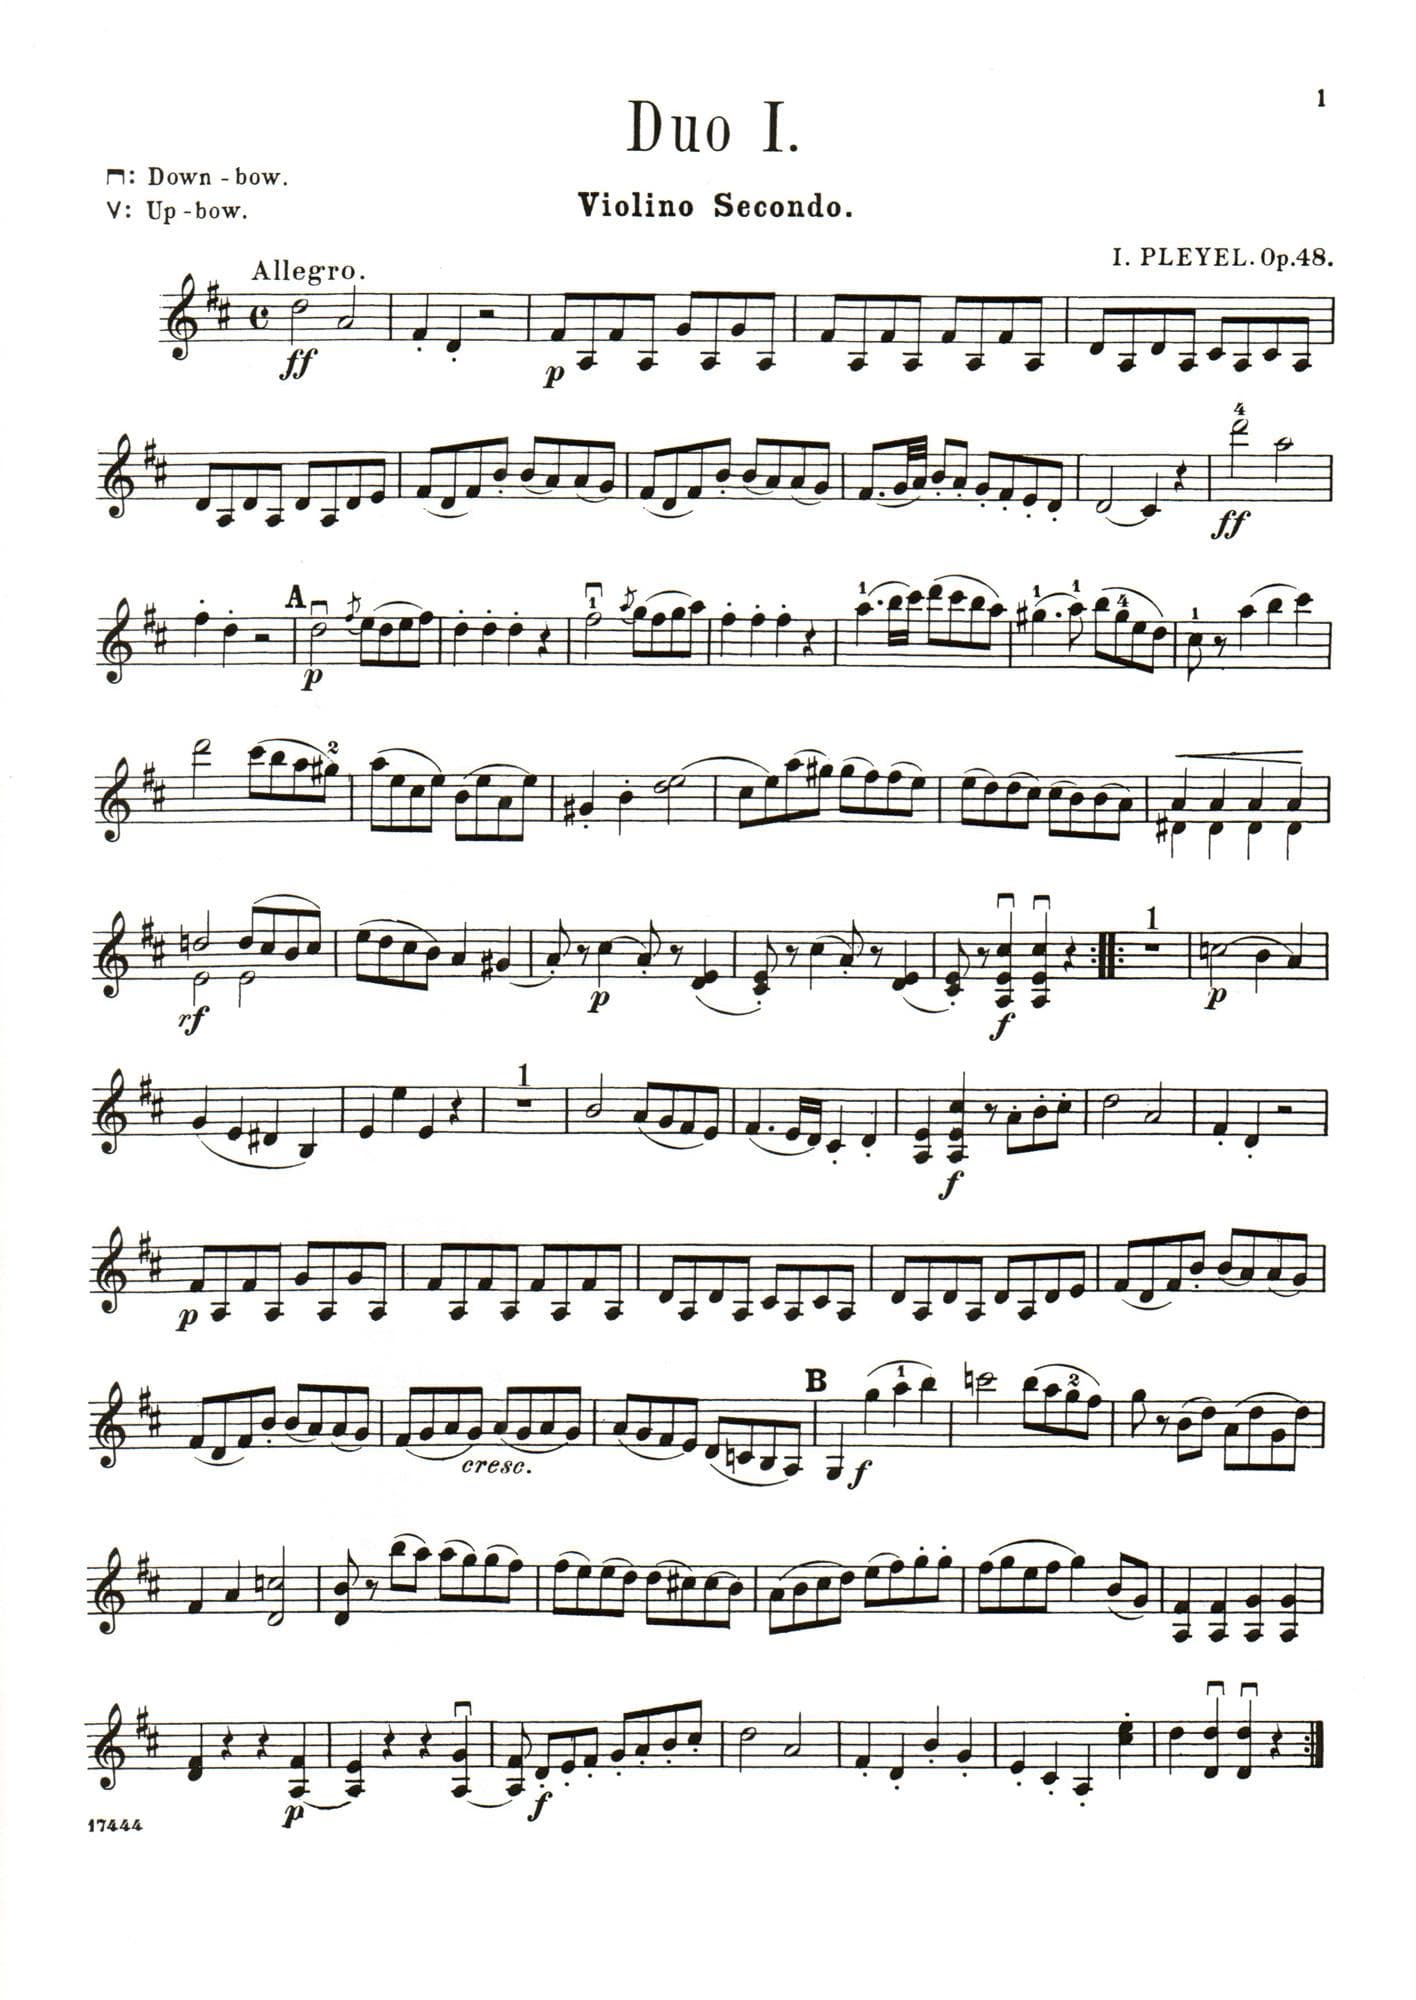 Pleyel, Ignace Joseph - Six Little Duets, Op 48, B 574-579 For Two Violins Published by G Schirmer